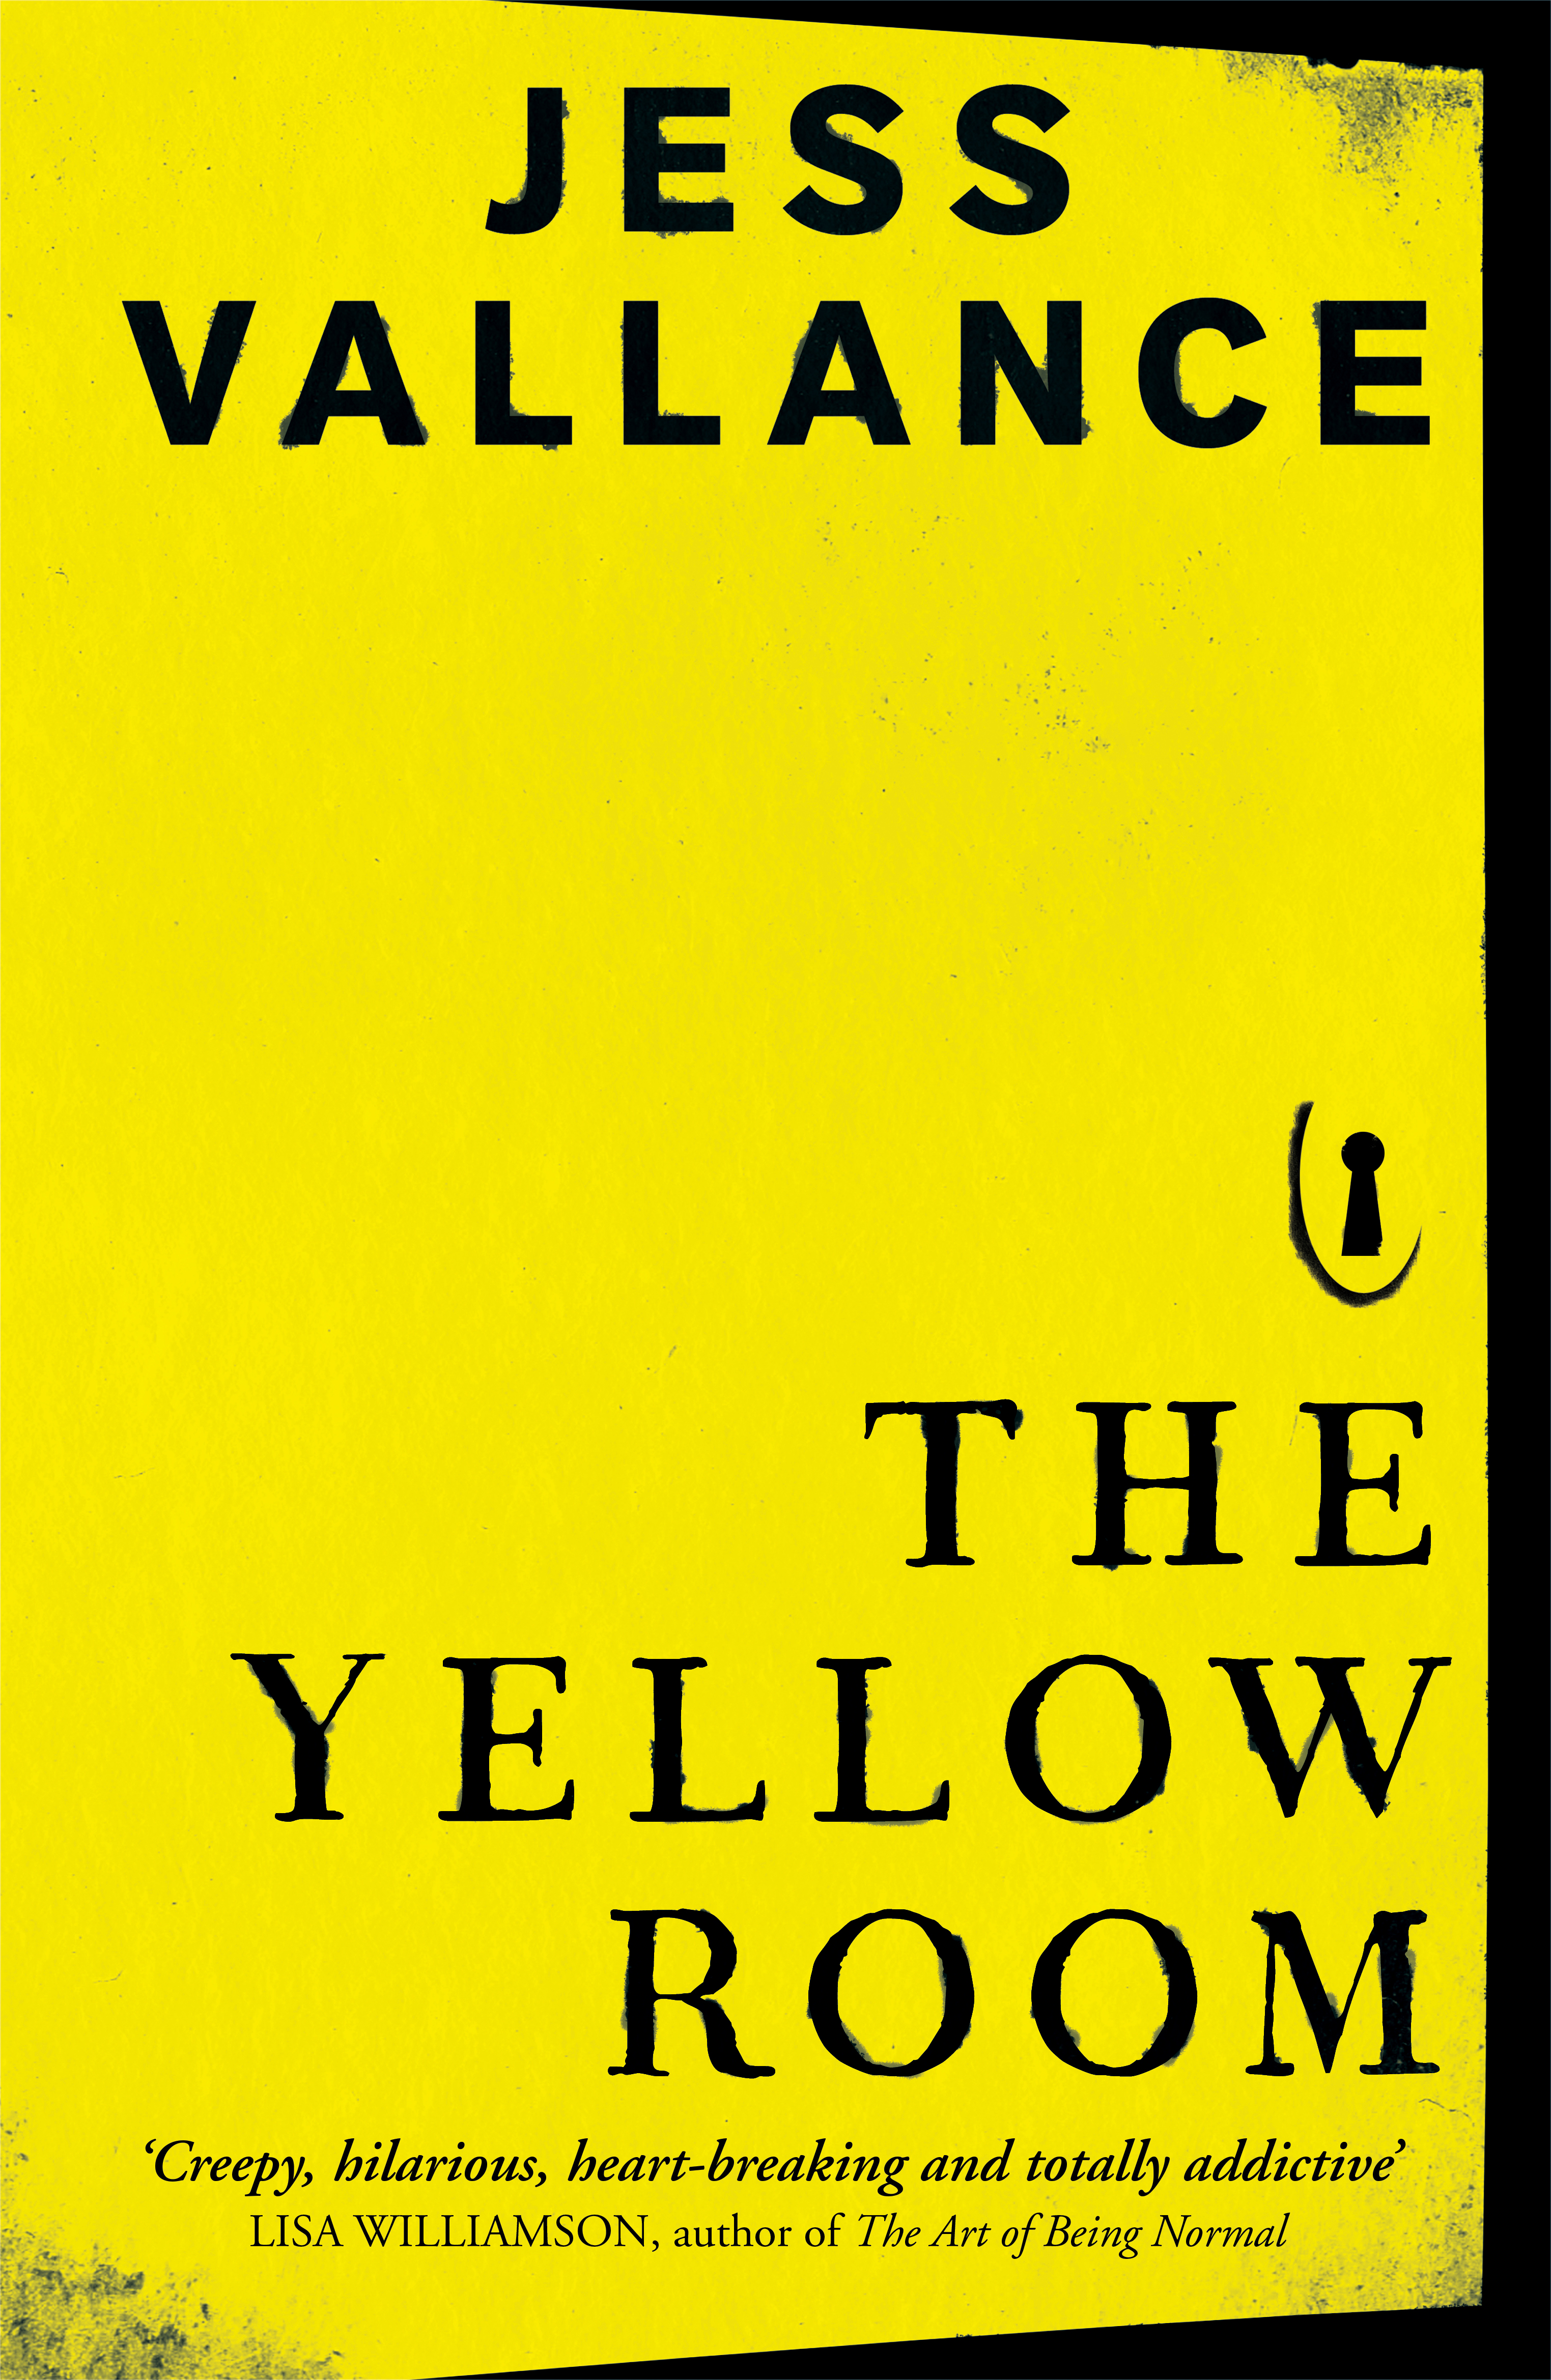 the mystery of the yellow room book